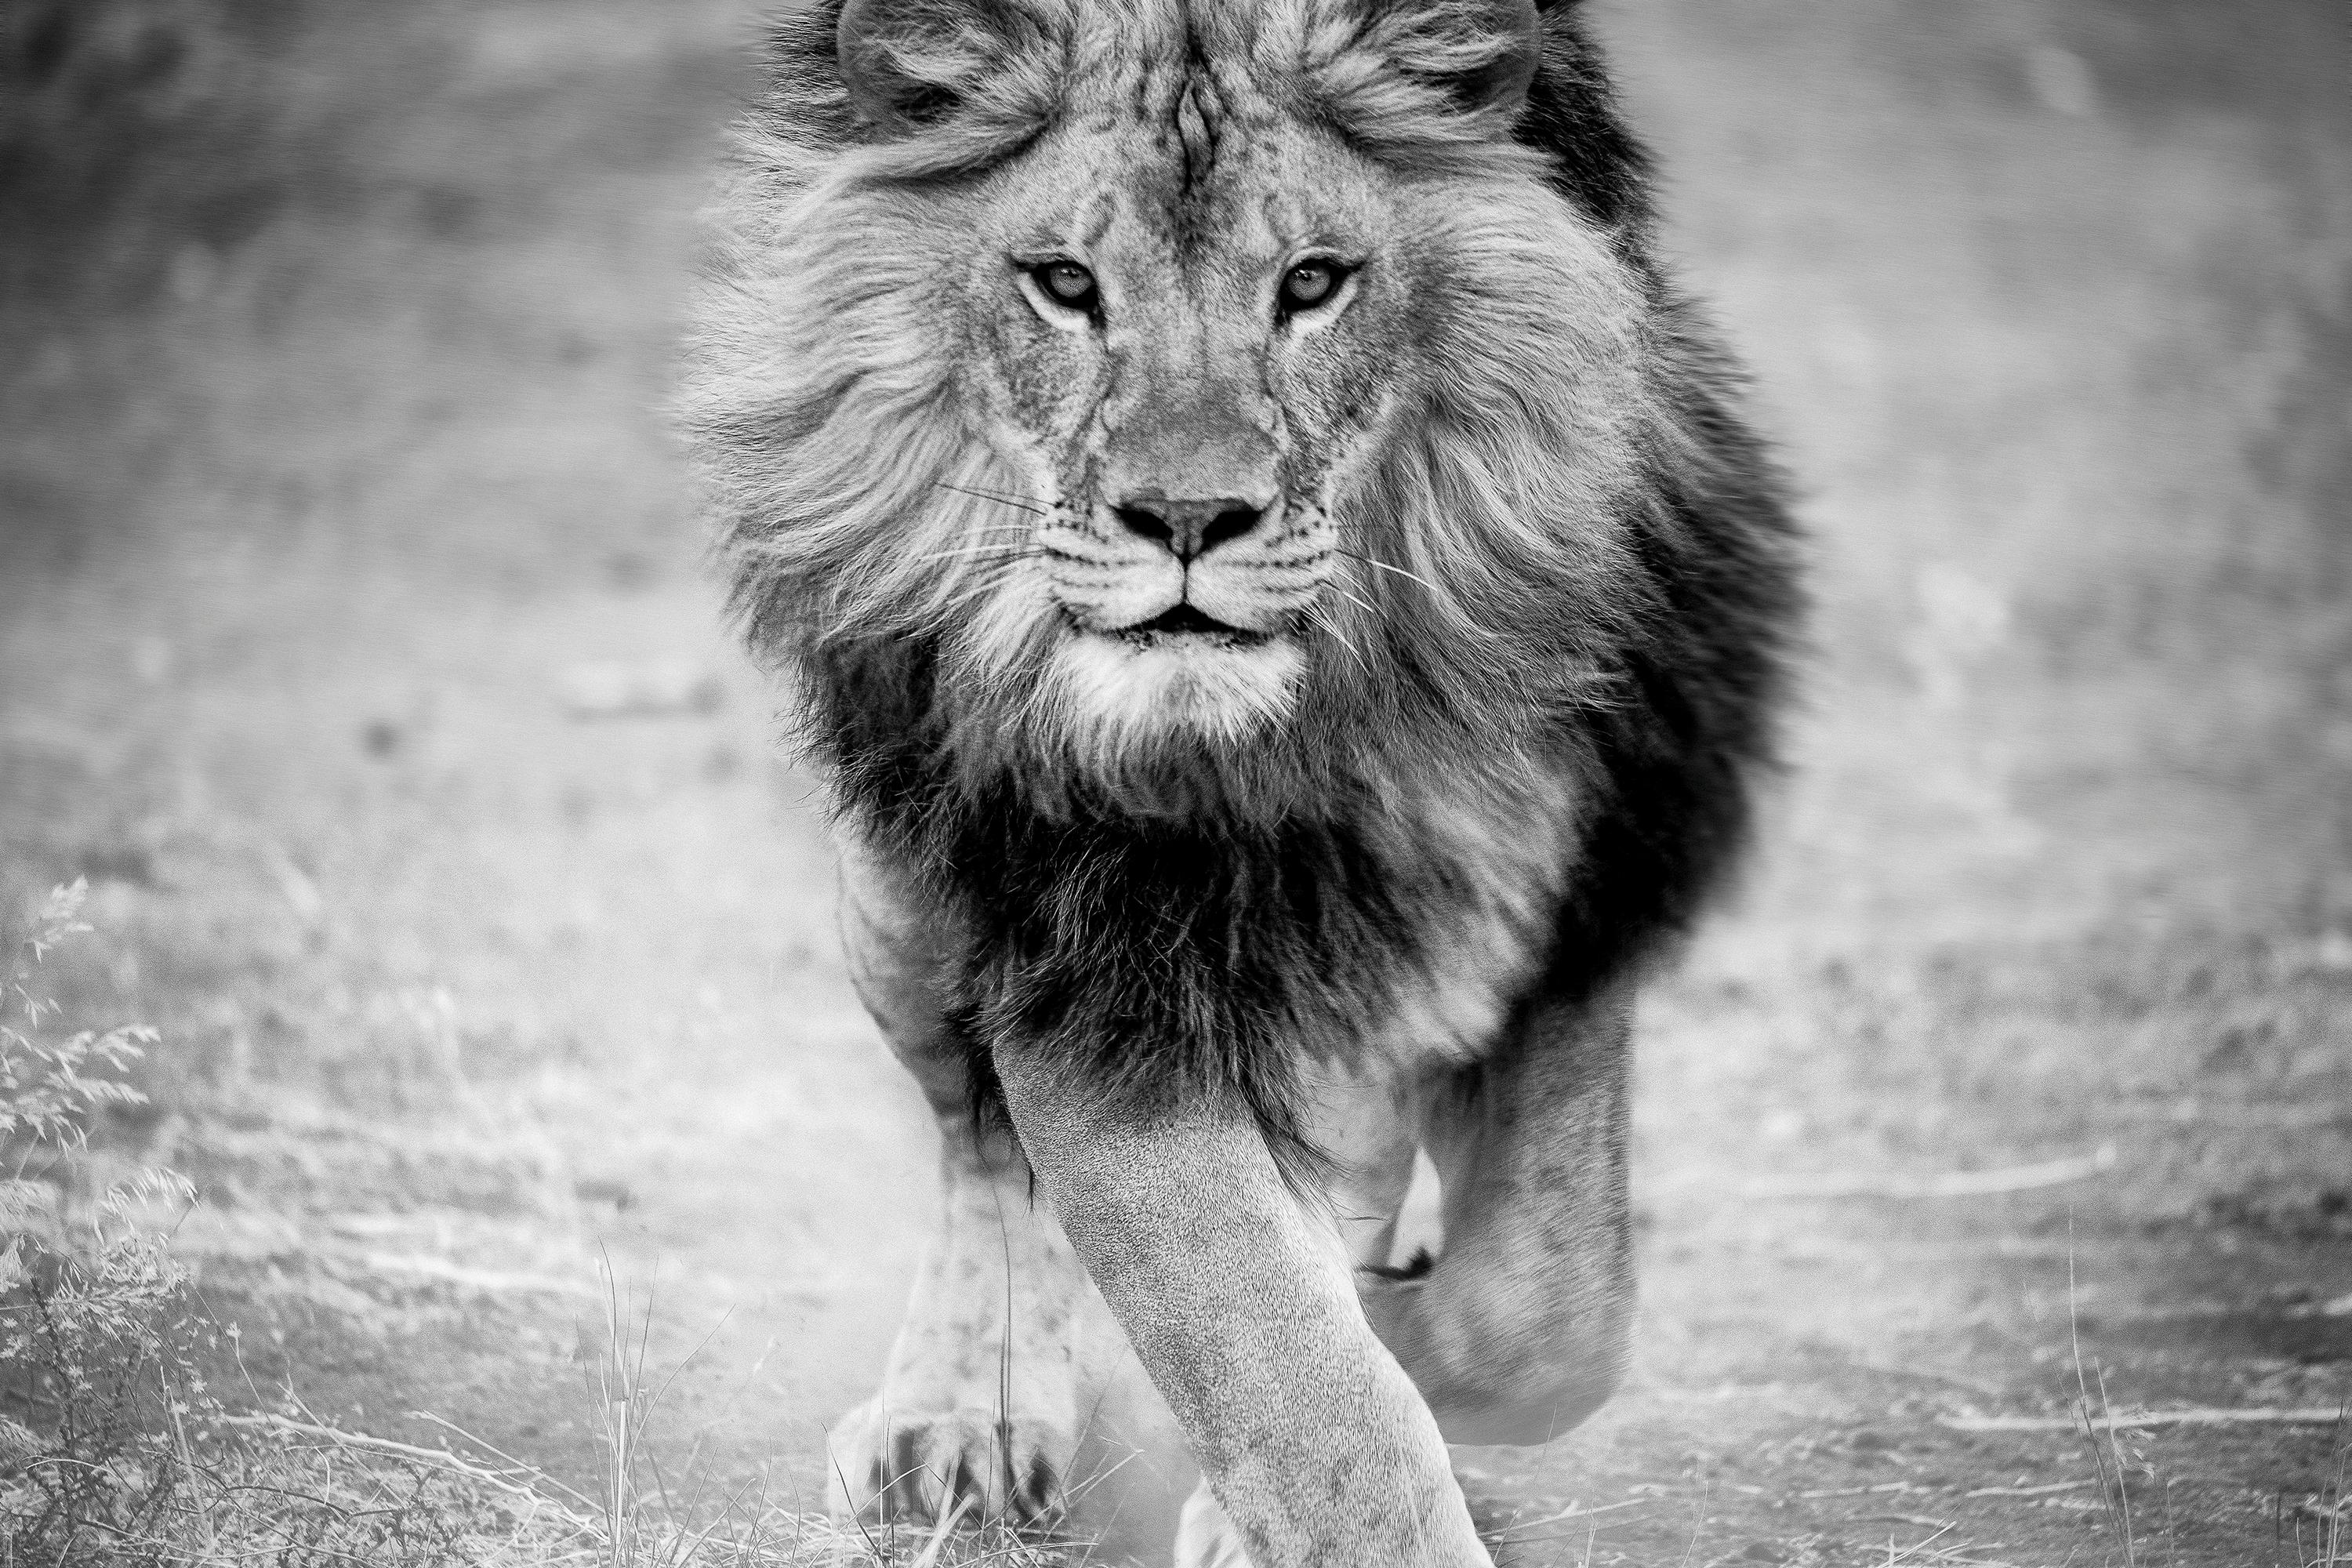 Shane Russeck Black and White Photograph - Lion Photograph "Panthera Leo" 28x40 - Black & White Photography, Unsigned Print